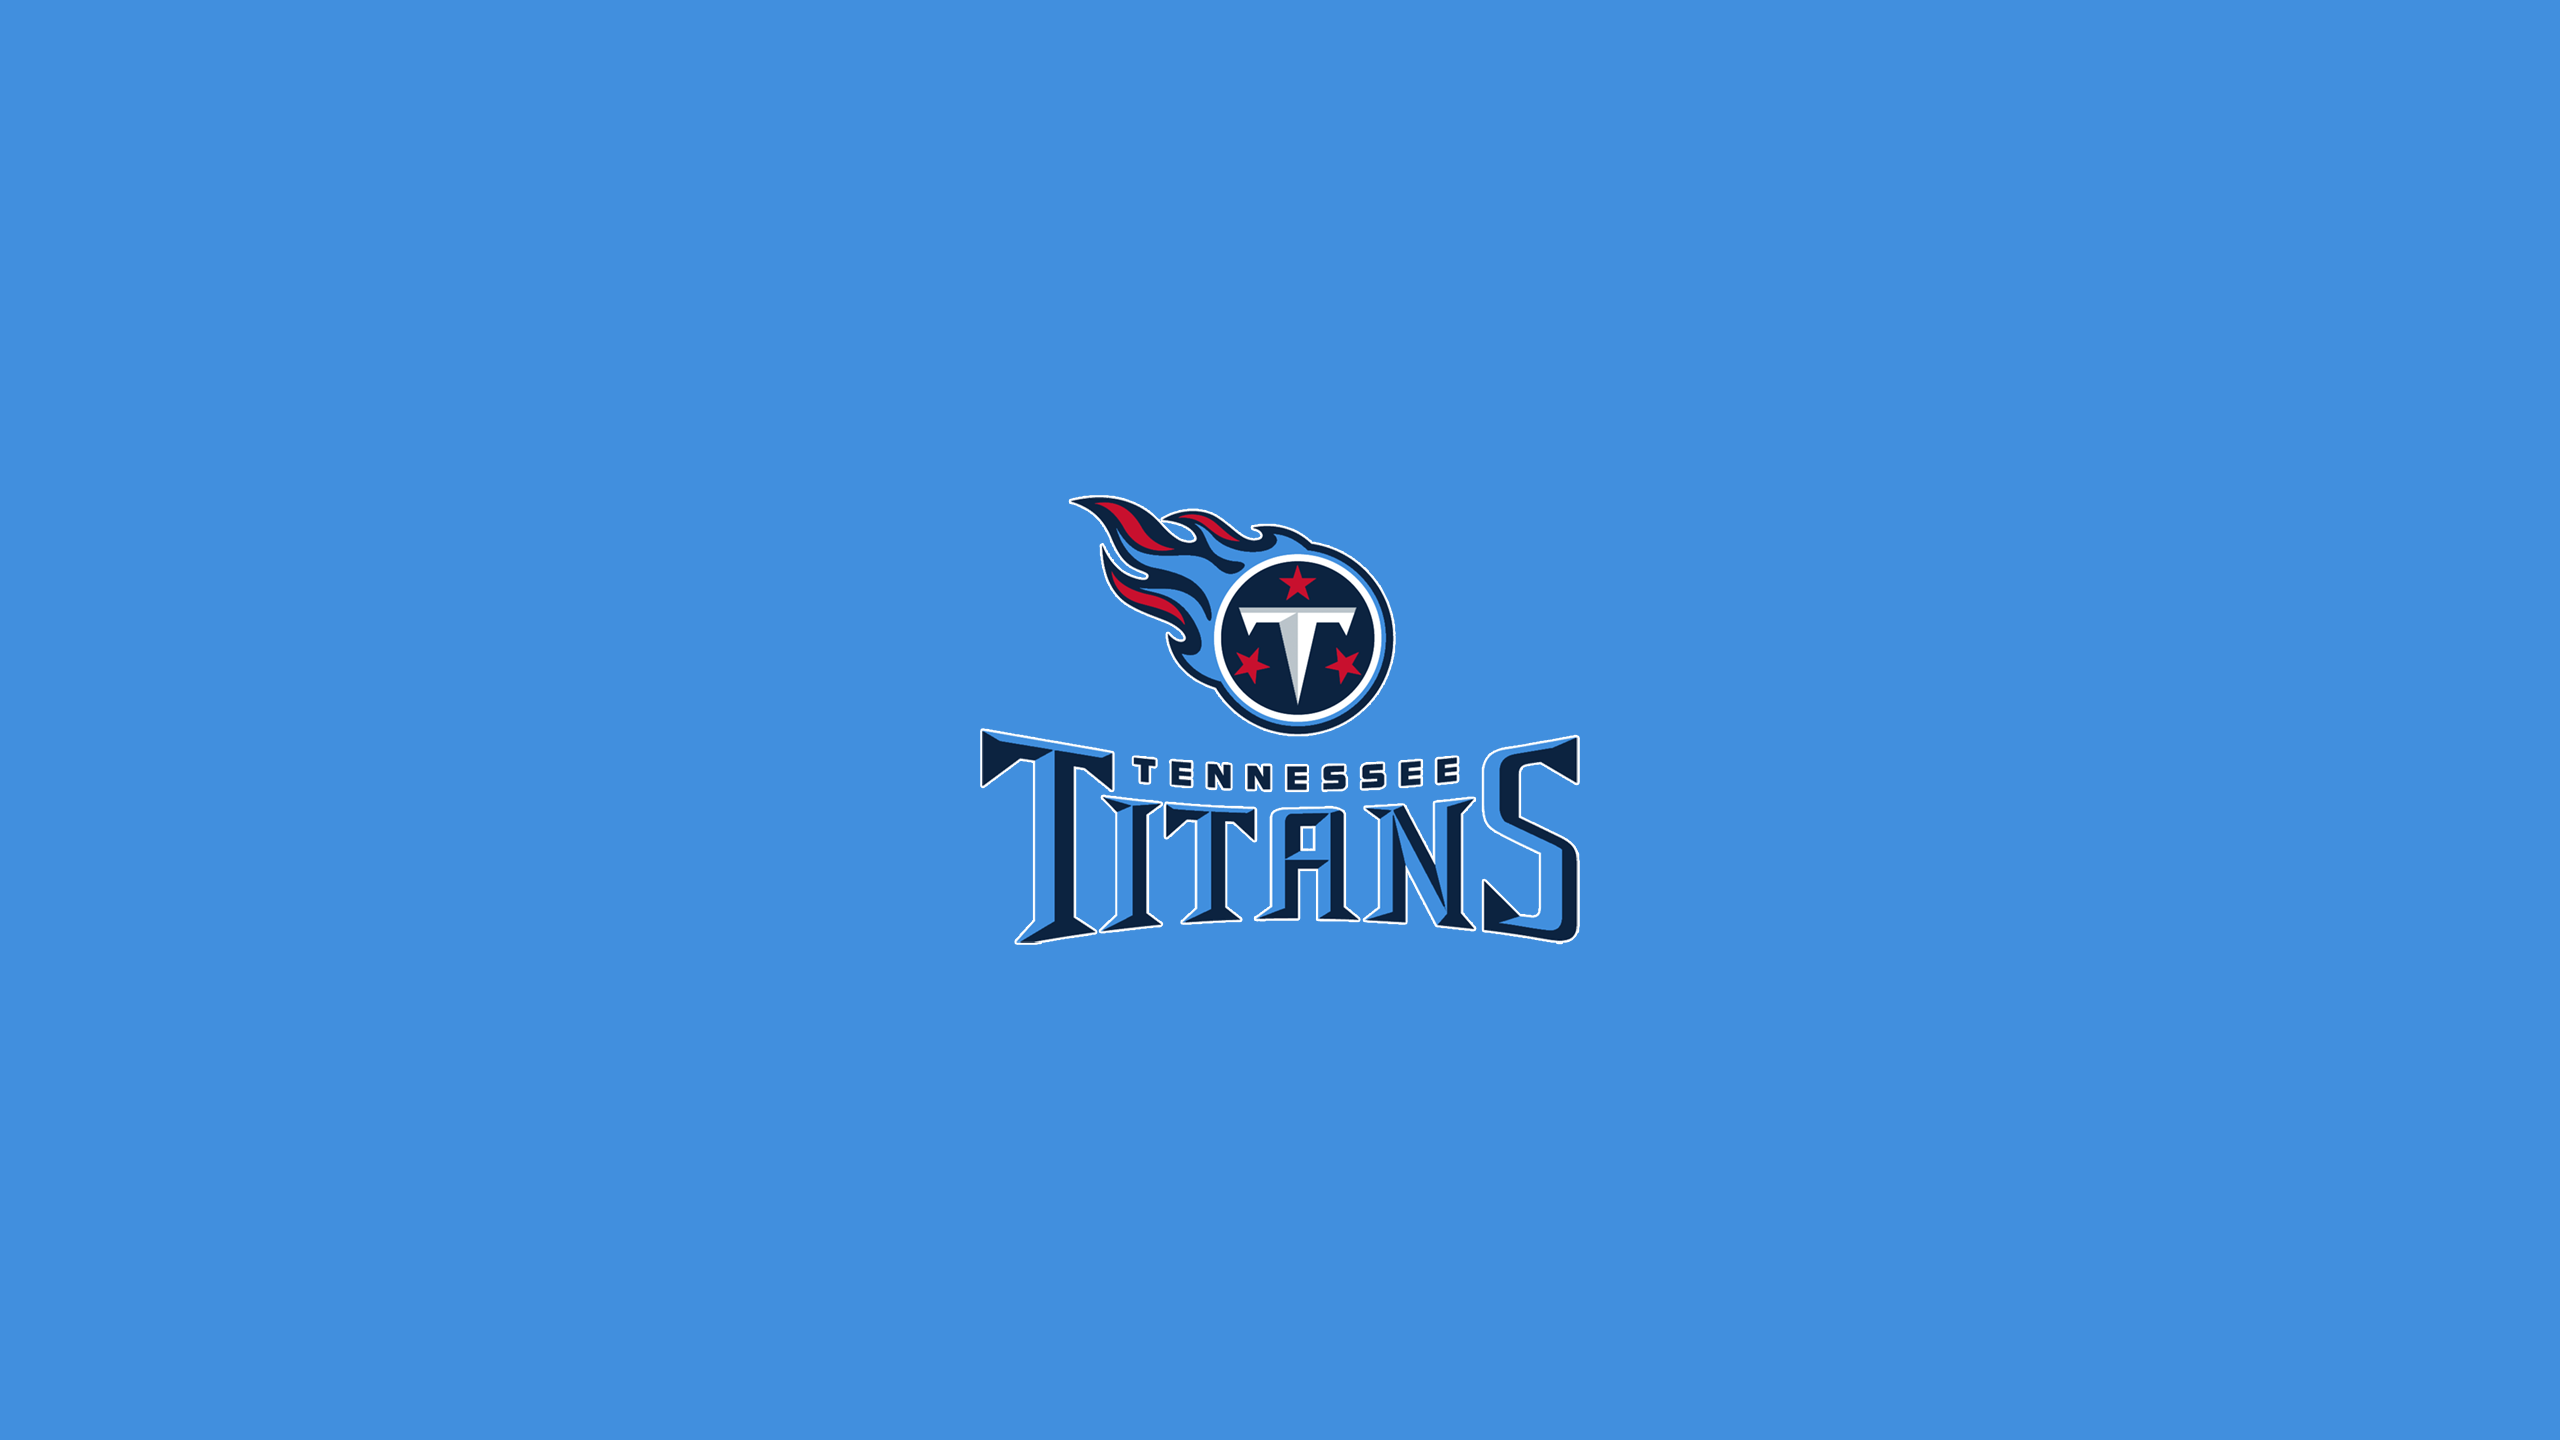 Tennessee Titans - NFL - Square Bettor